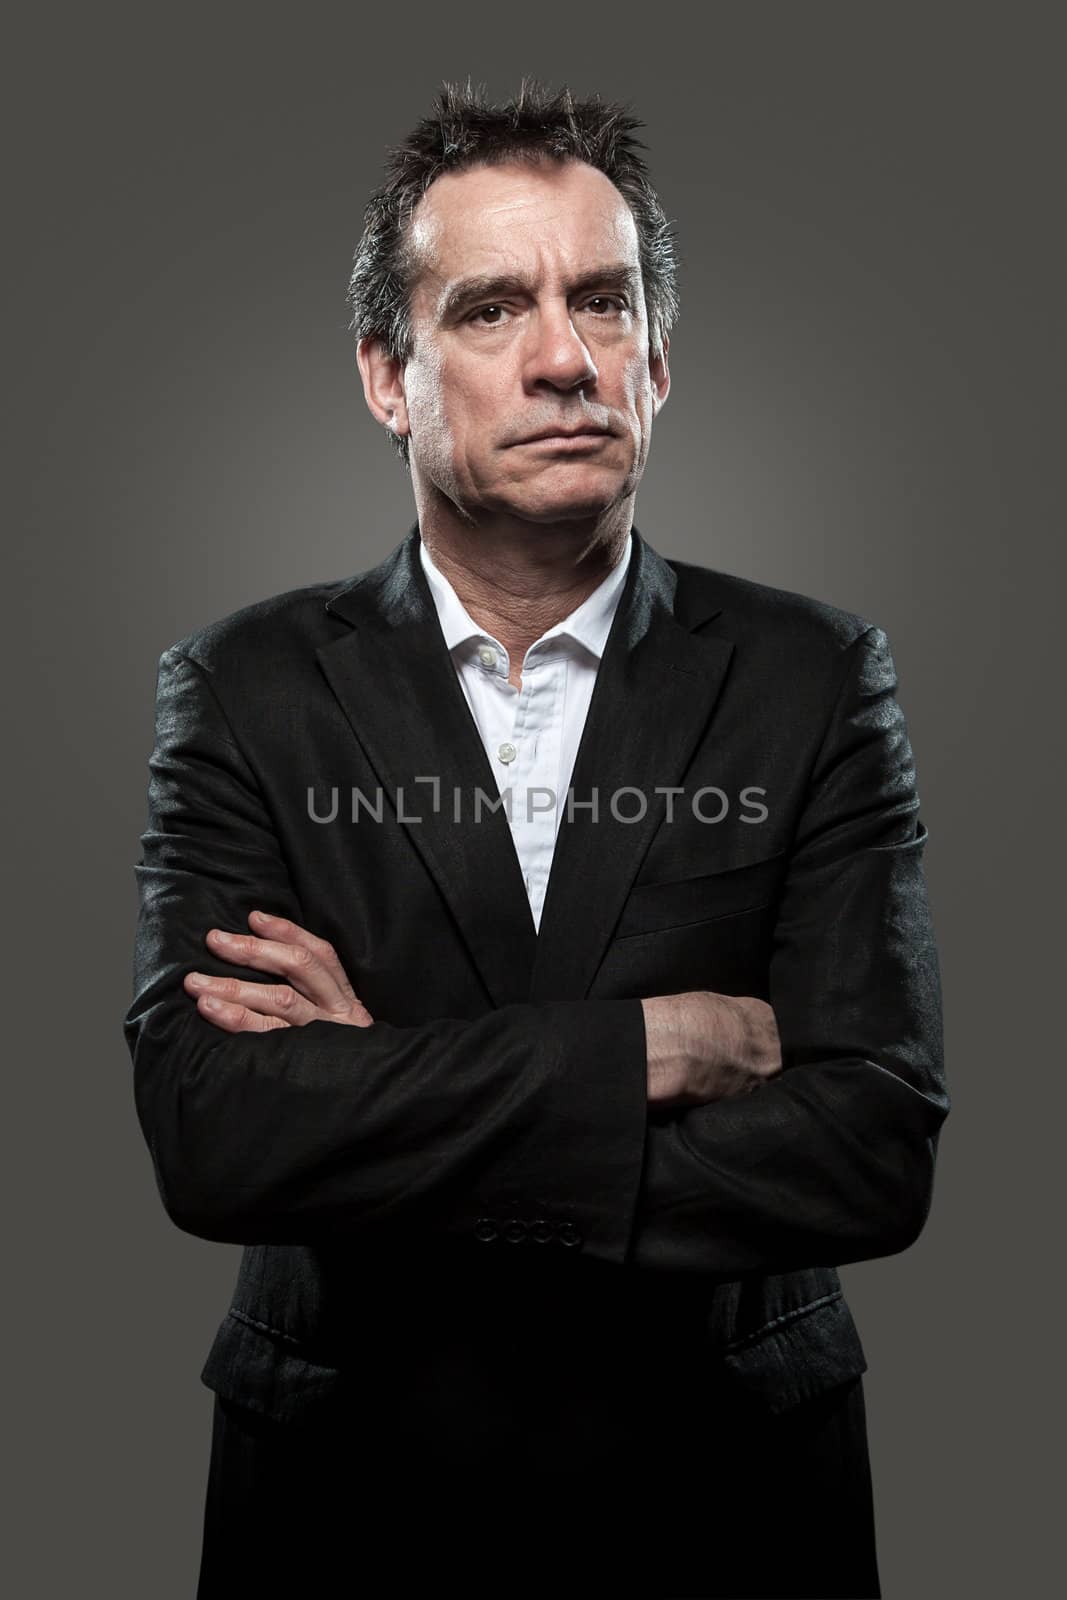 Grumpy Stern Middle Age Business Man in Suit Arms Folded Grey Background High Contrast Grunge Look